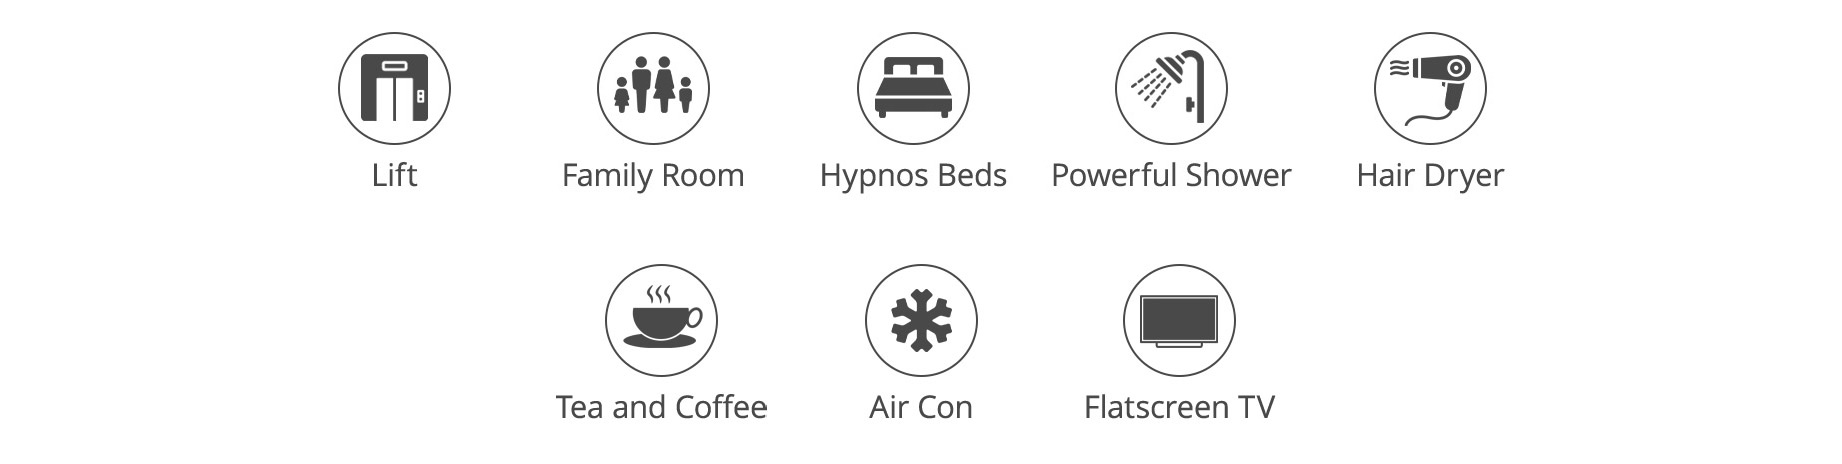 Facilities available icons